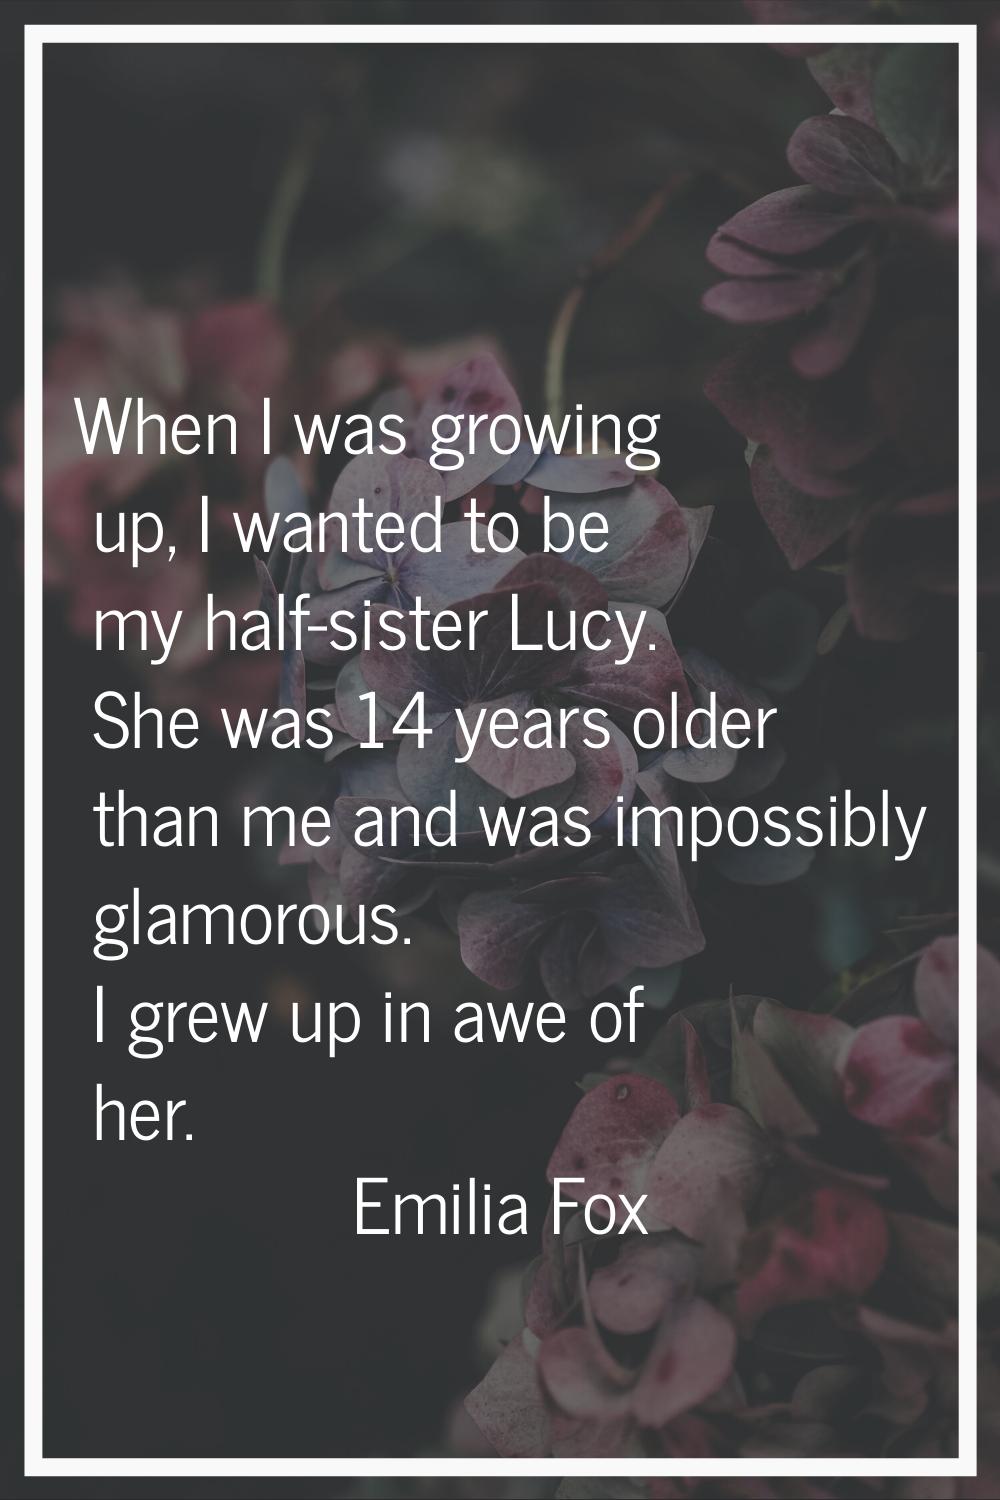 When I was growing up, I wanted to be my half-sister Lucy. She was 14 years older than me and was i